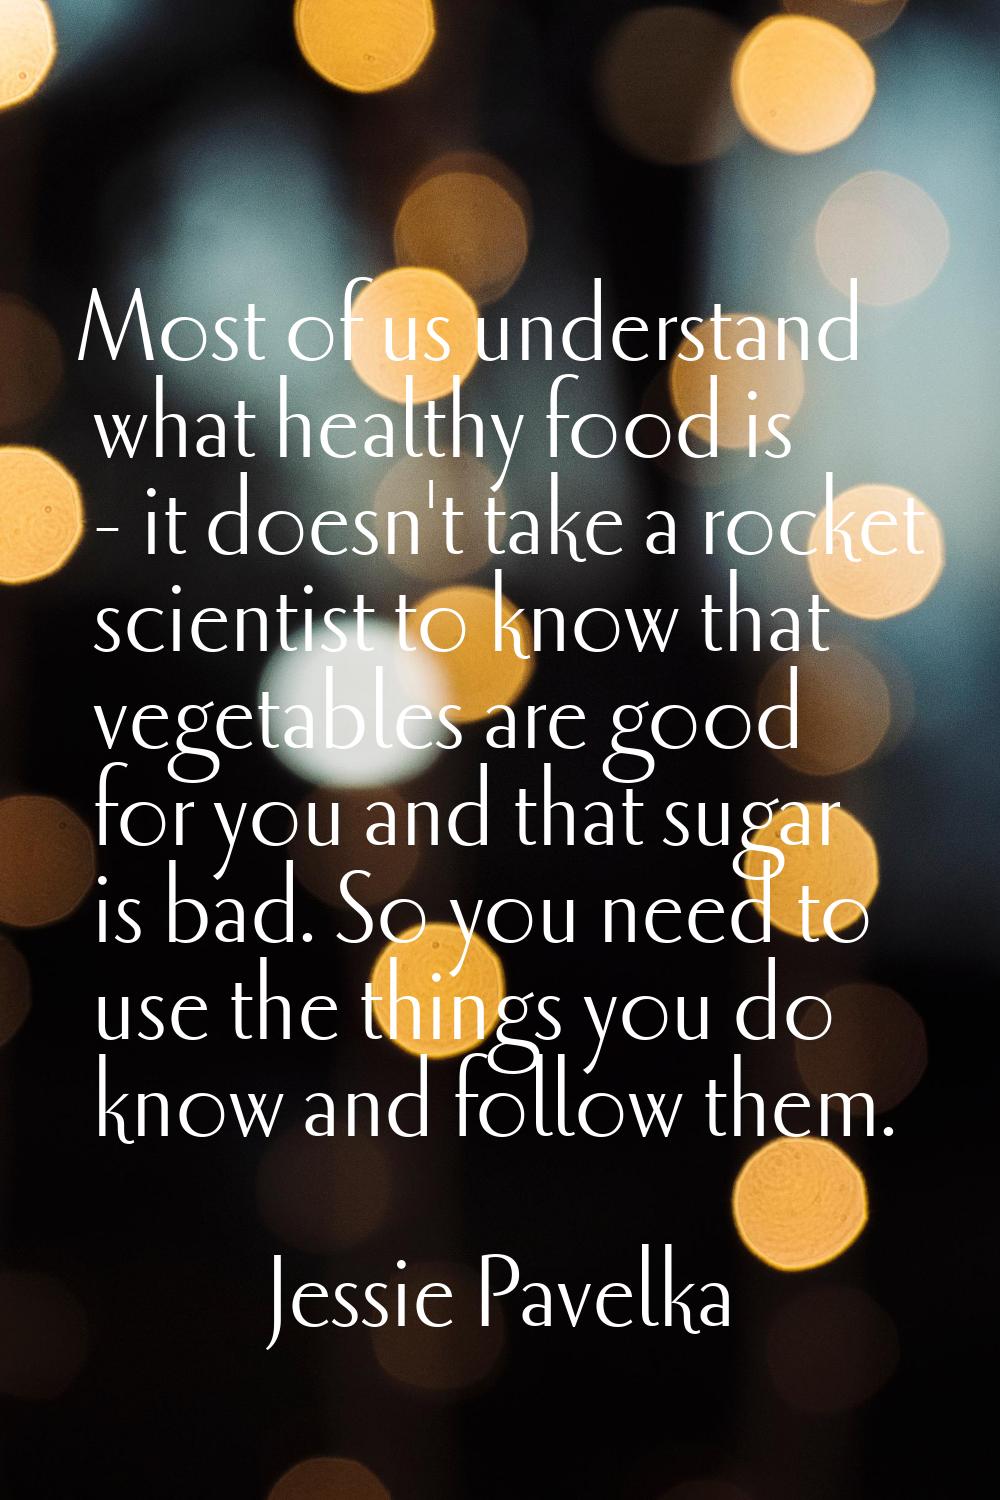 Most of us understand what healthy food is - it doesn't take a rocket scientist to know that vegeta